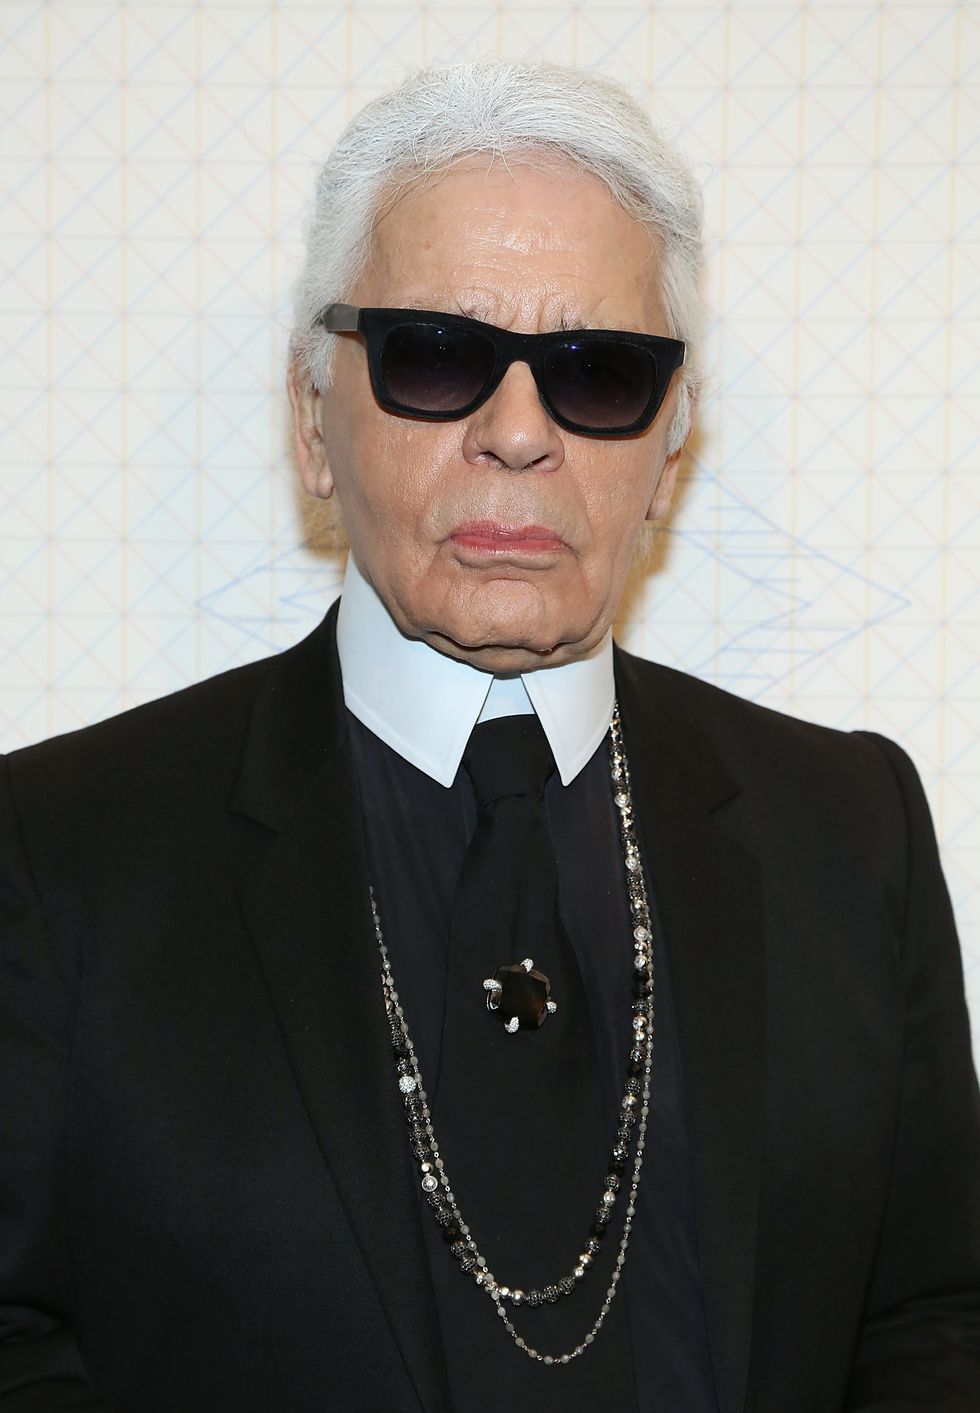 Karl Lagerfeld says that benefits should only go to well-dressed people